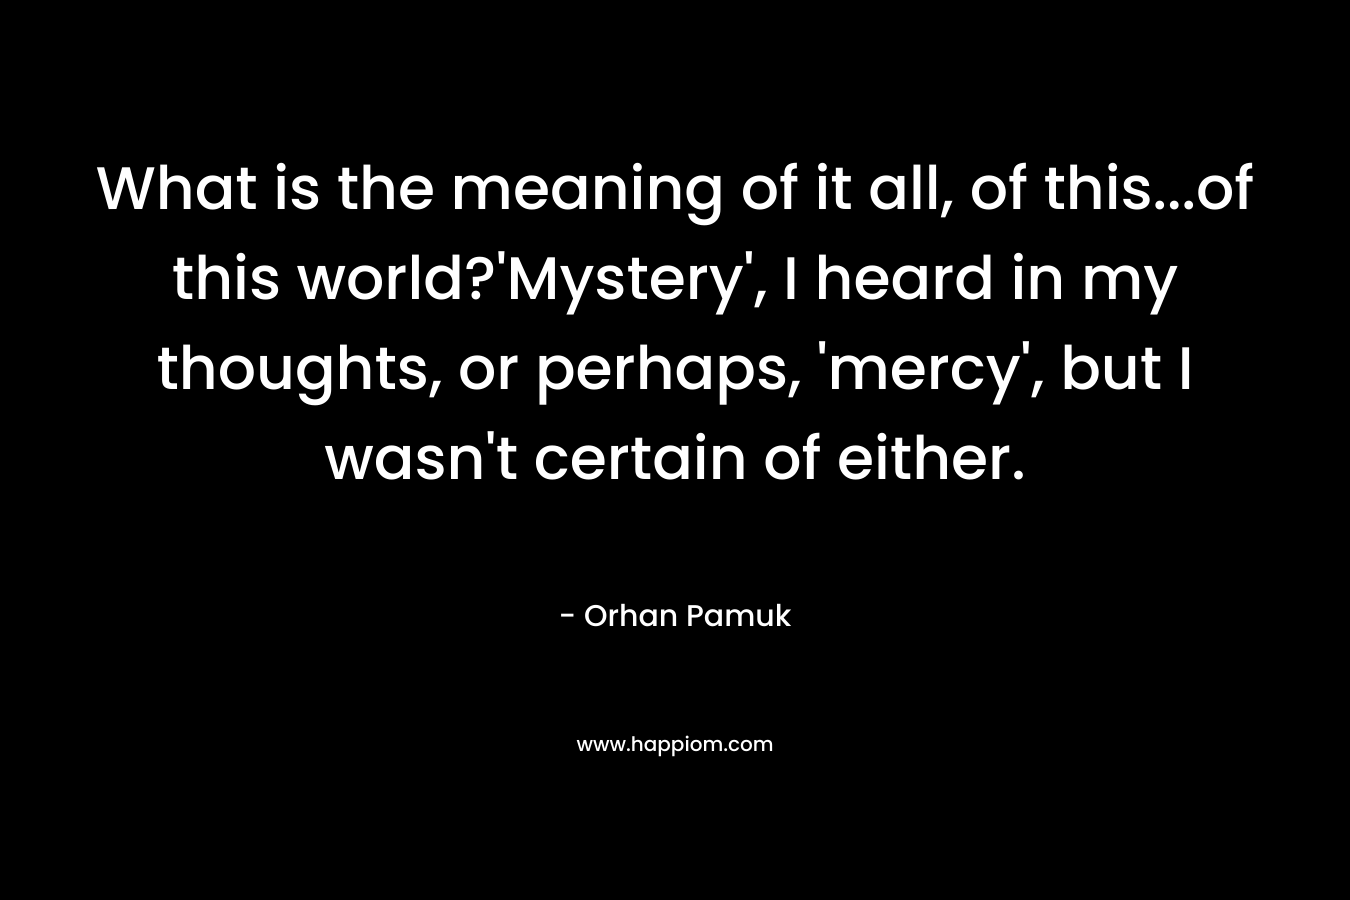 What is the meaning of it all, of this…of this world?’Mystery’, I heard in my thoughts, or perhaps, ‘mercy’, but I wasn’t certain of either. – Orhan Pamuk